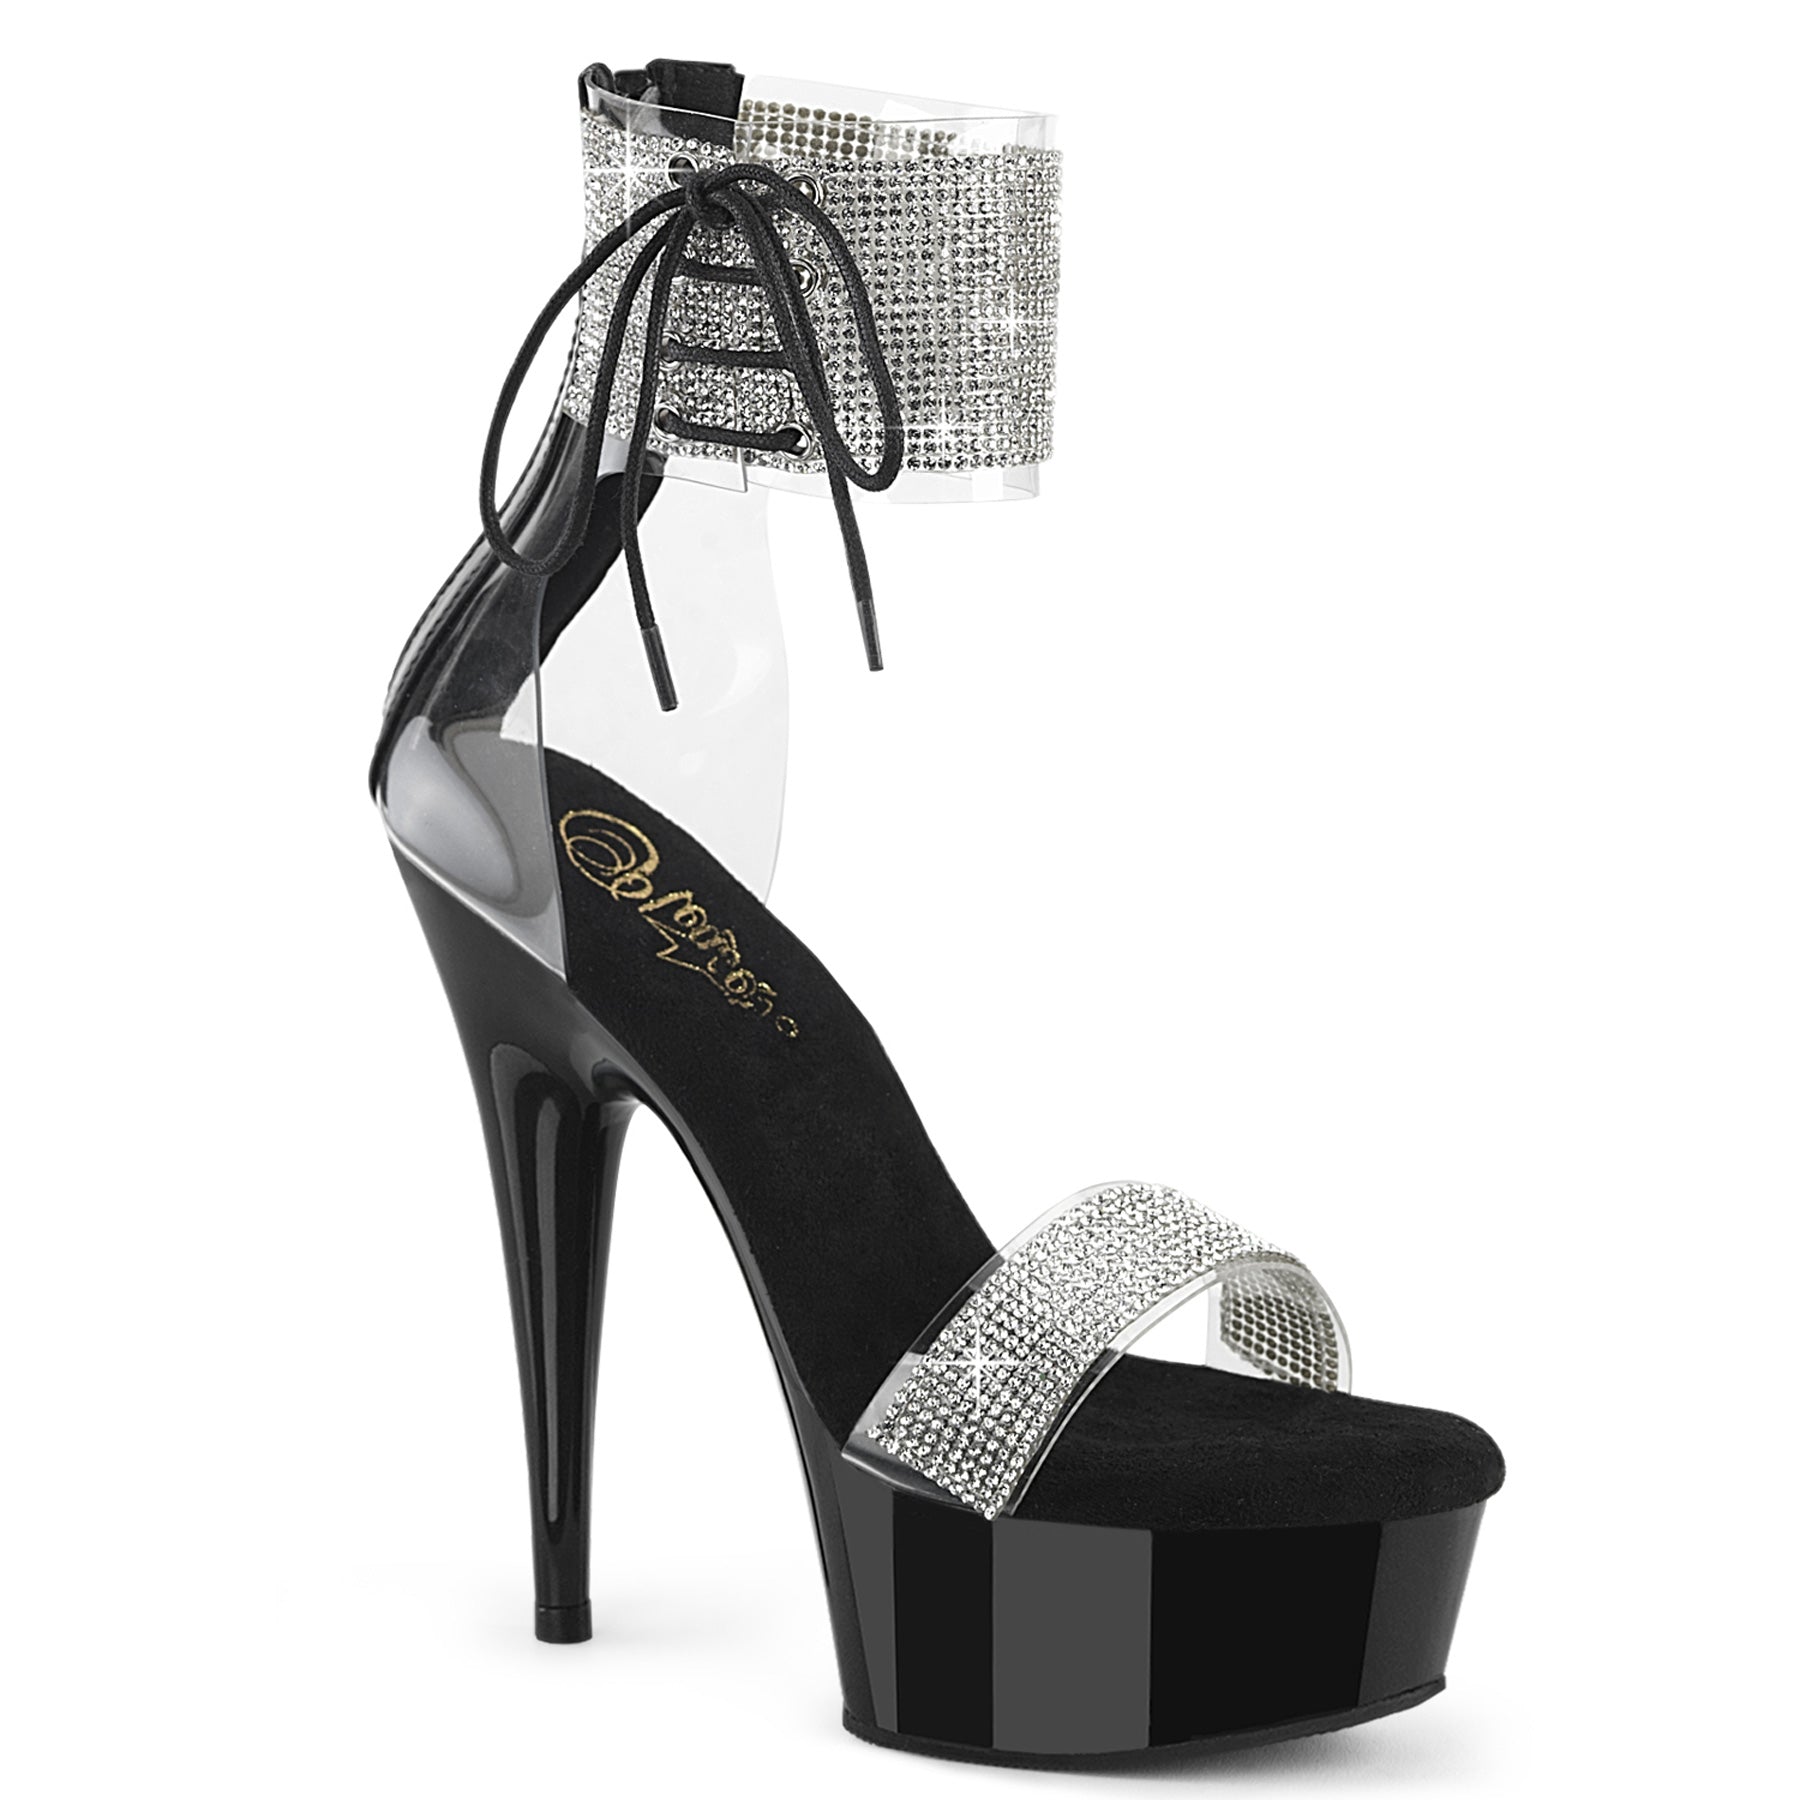 6 Inch Heel DELIGHT-627RS Clear Black